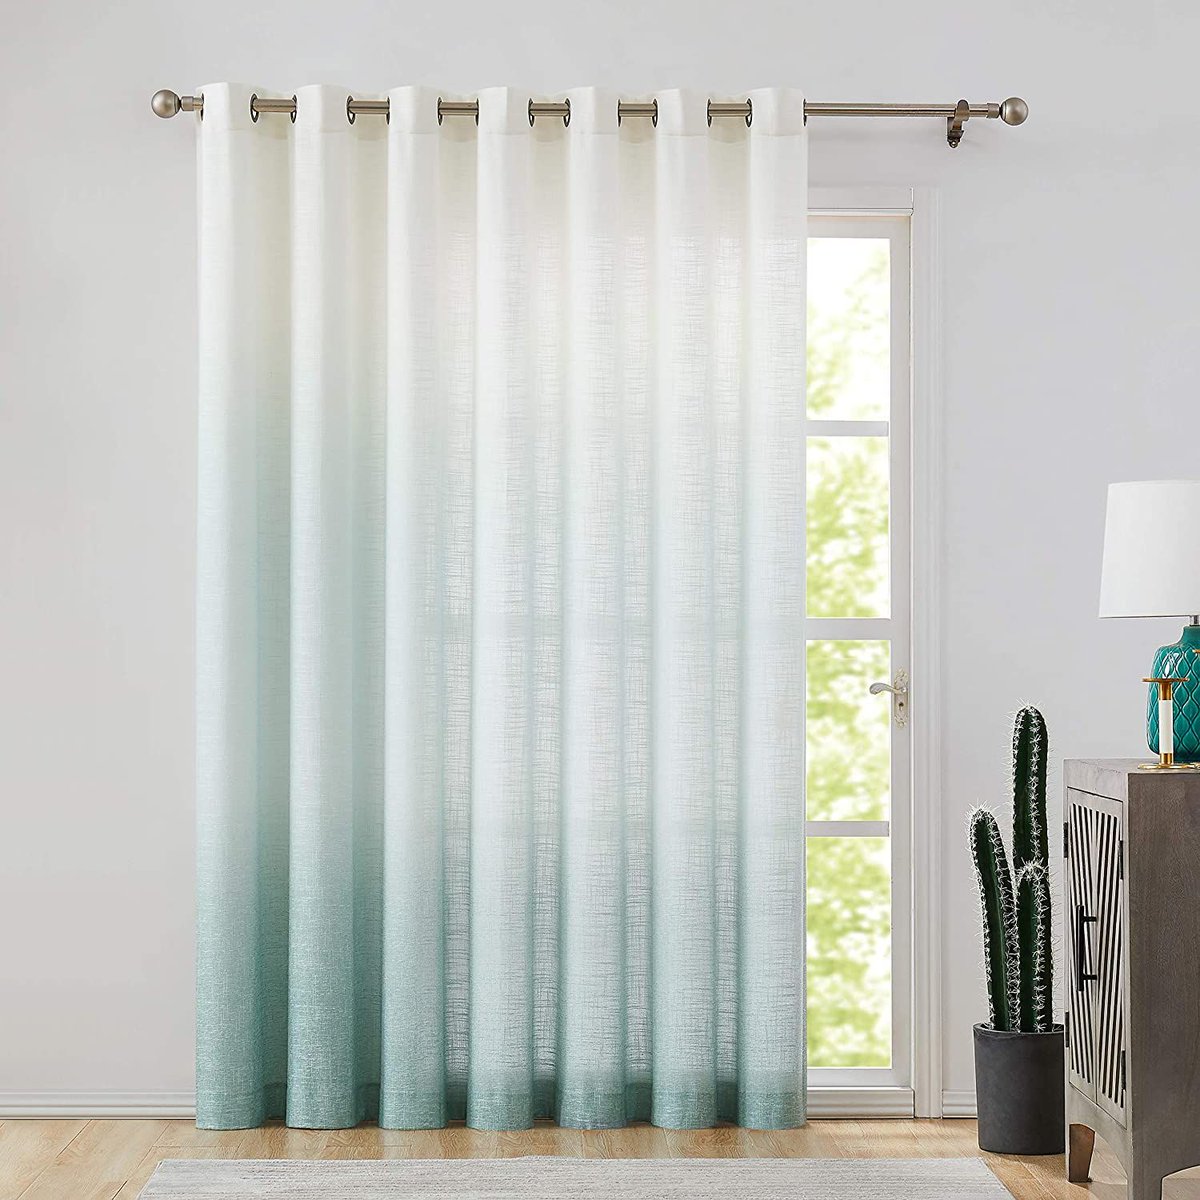 Ombre semi sheer curtain, rayon blended, heavy tectured panel, easy care, for wholesale #homedecor #home #homeintorior #homedesign #curtain #drapery #fabric #hometextiles #windowtreament